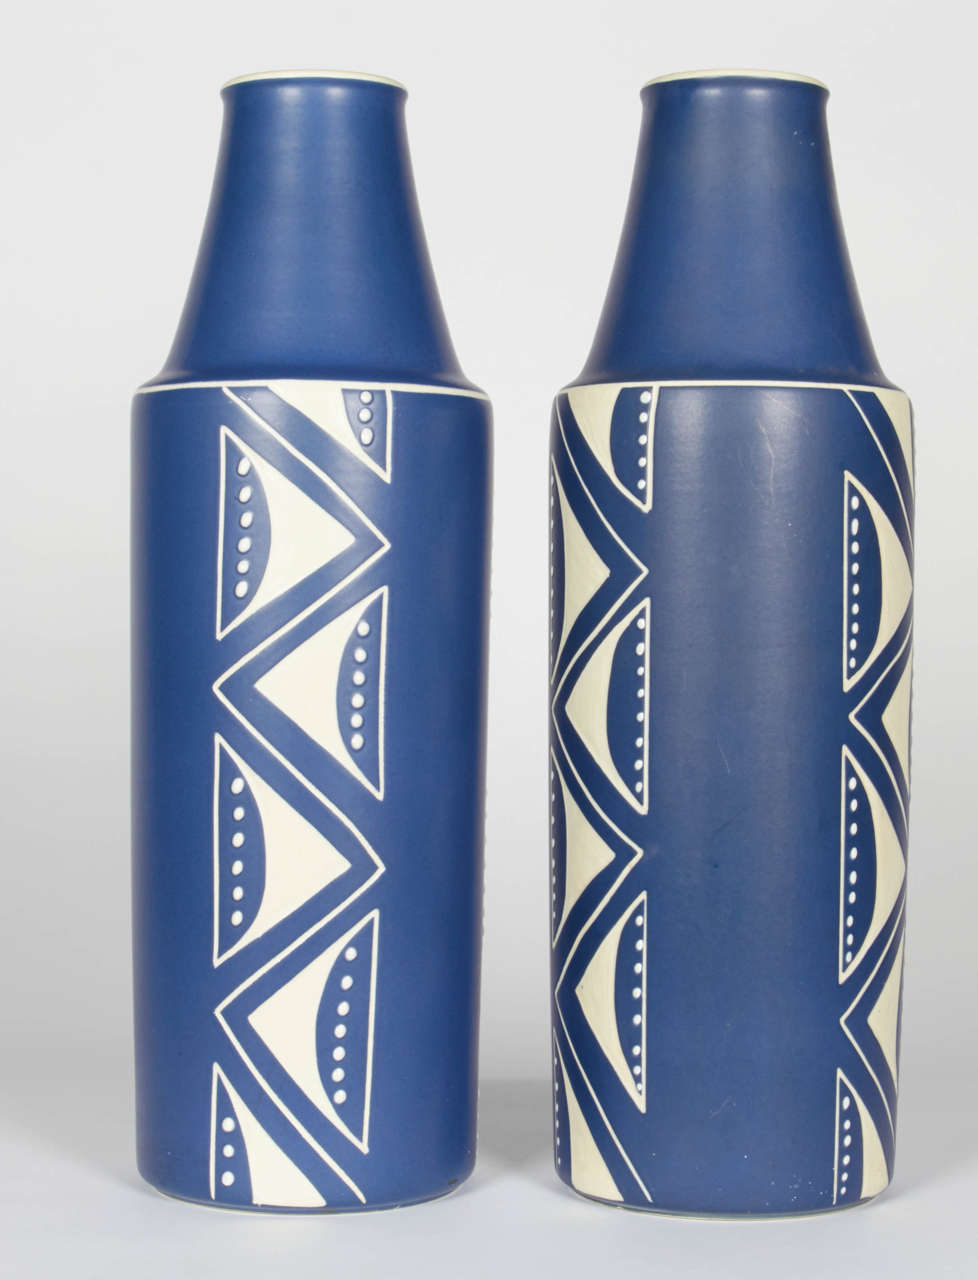 Founded by Herman Sonne Wolffsen and Edvard Christian Sonne in 1835, Soholm Pottery started with domestic wares. These vases were designed by Rigmor Nielsen, a decorator and designer at Soholm from 1940-1989.